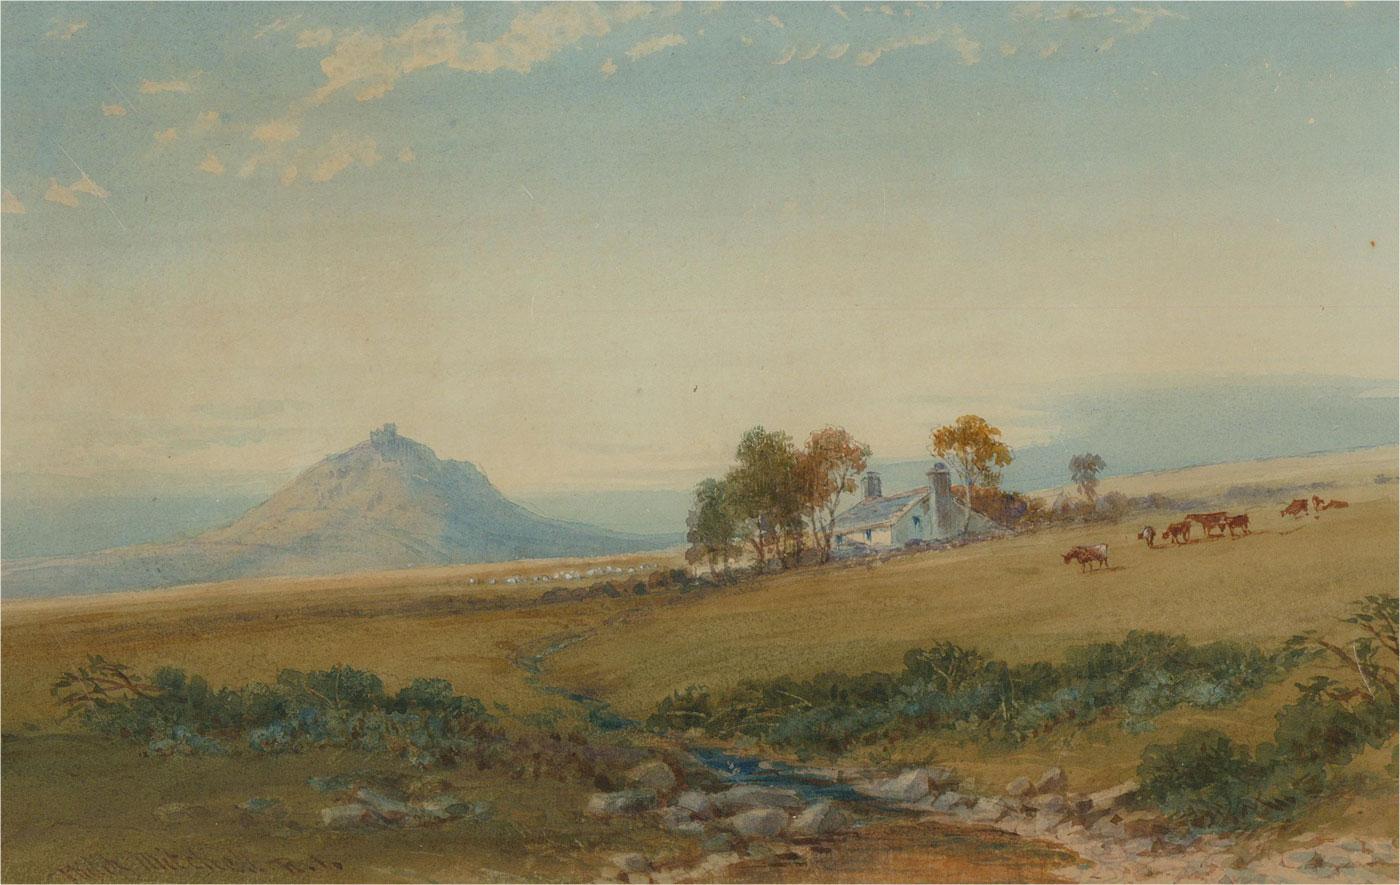 A Dartmoor landscape depicting the view of Brent Tor from Black Down. Presented glazed in a white mount with gold detailing and a distressed gilt-effect wooden frame. Signed to the lower-left edge. There is a gallery label on the verso which